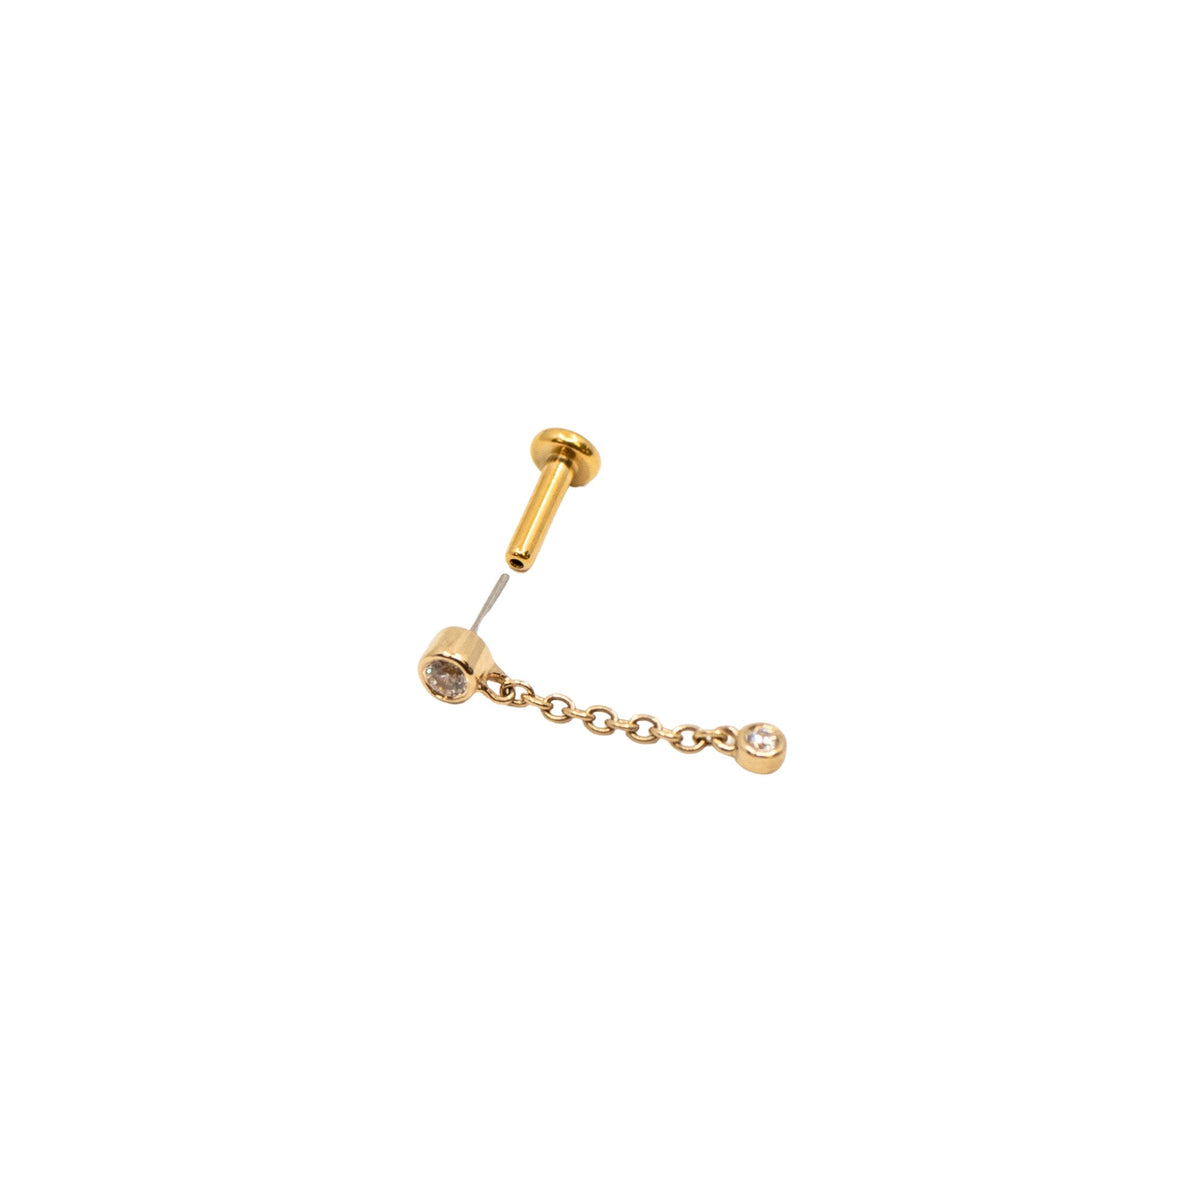 Yellow Gold Studs Round Swarovski Crystal Dangle Earring The Curated Lobe